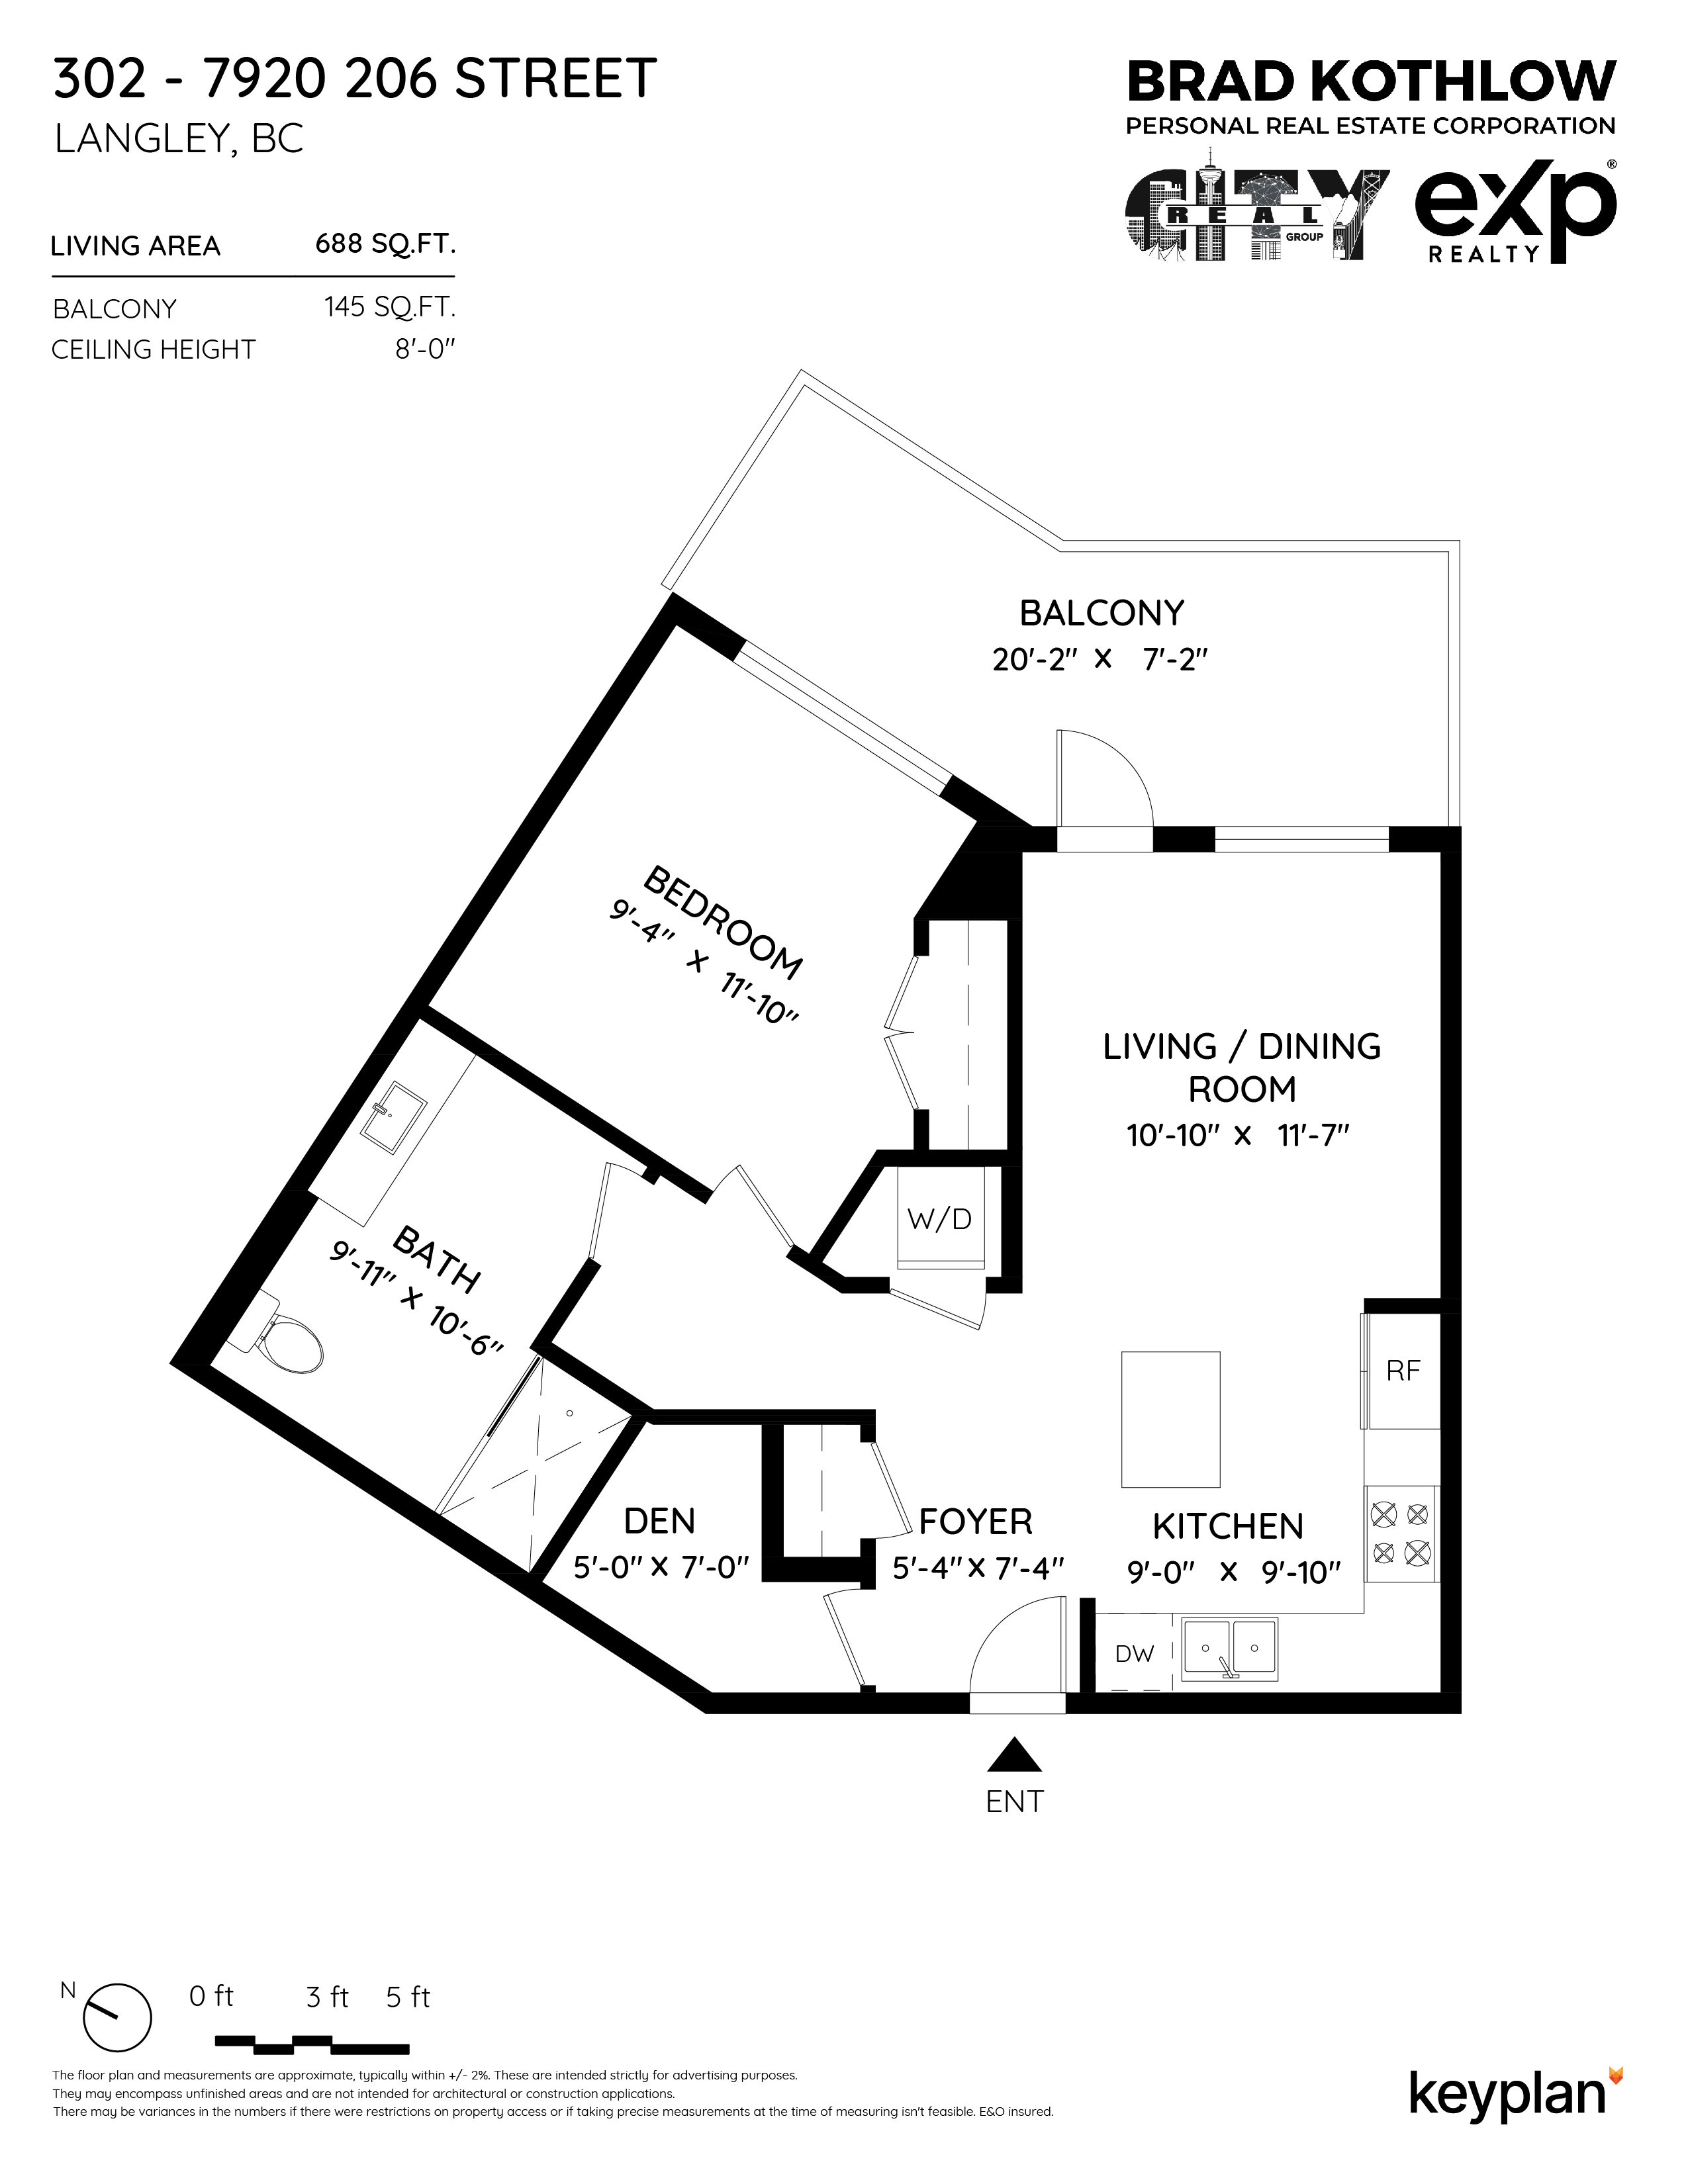 Real City Group - Unit 302 - 7920 206 Street, Langley, BC, Canada | Floor Plan 1